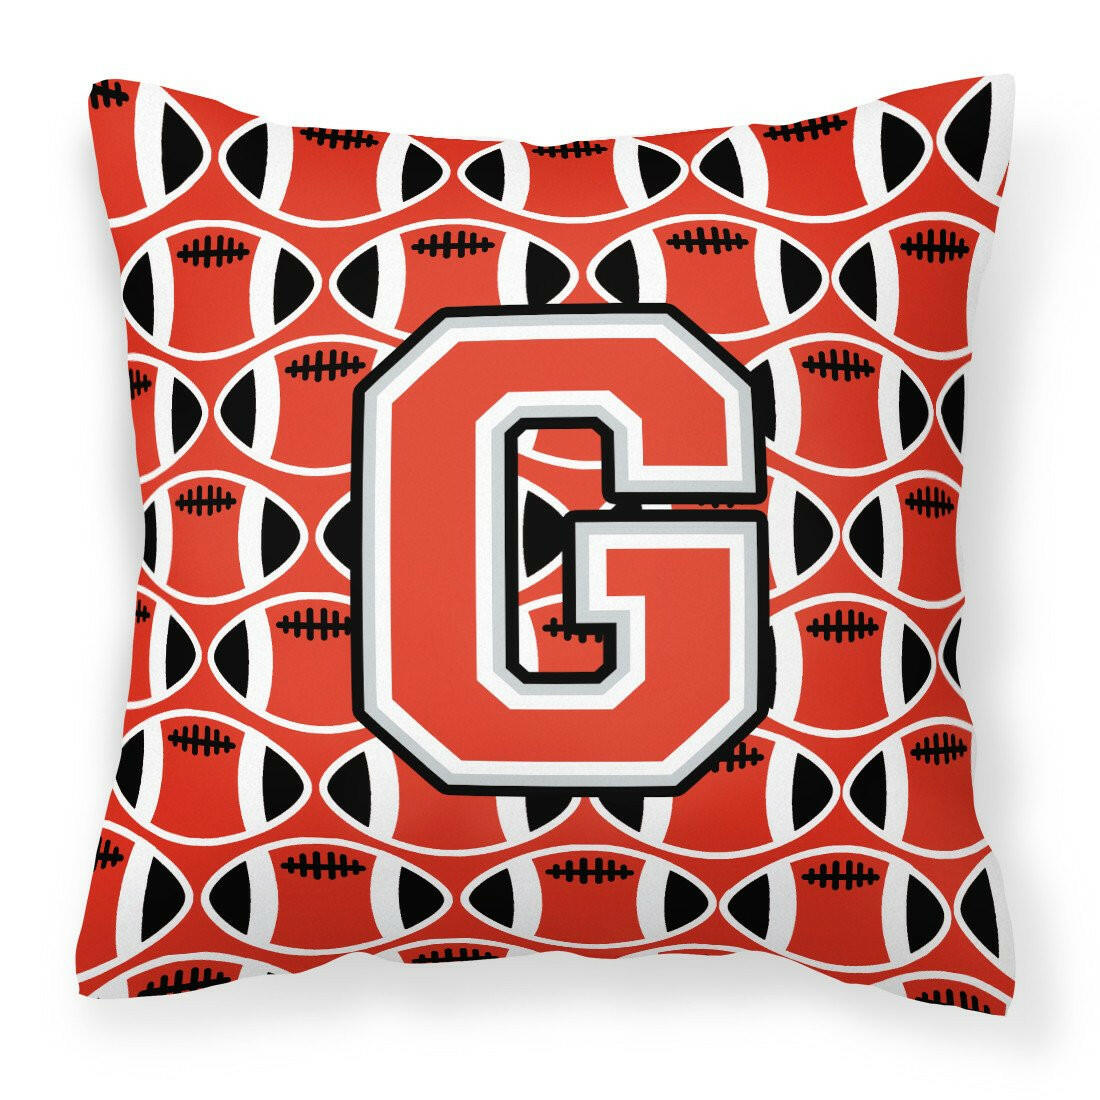 Letter G Football Scarlet and Grey Fabric Decorative Pillow CJ1067-GPW1414 by Caroline's Treasures